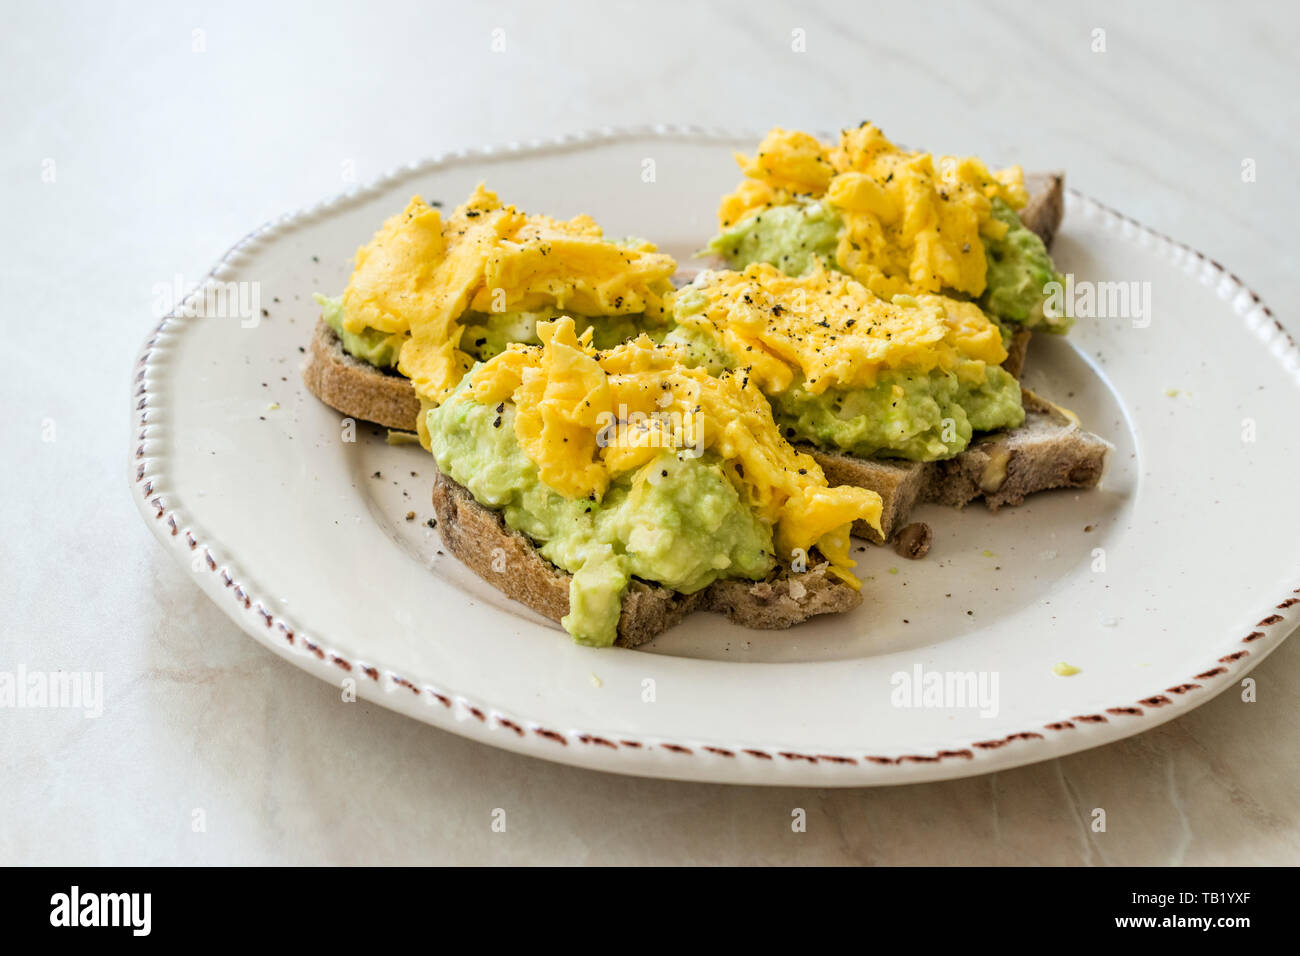 Scrambled Eggs with Avocado on Toast Bread for Breakfast. Organic Food. Stock Photo